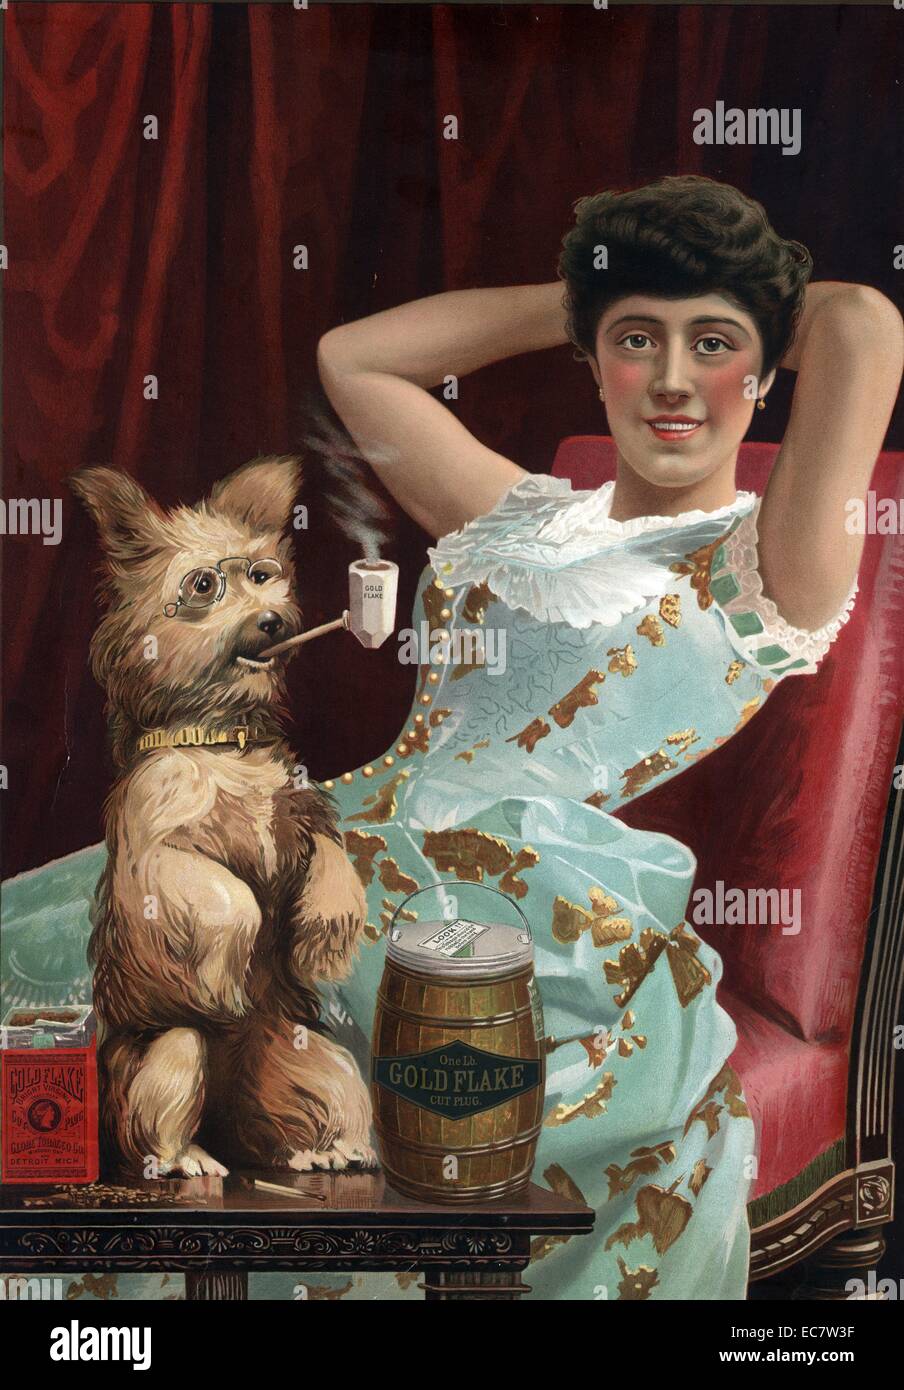 Advertisement for Globe Tobacco Co. The advert shows a young woman relaxing (lounging) as a dog smokes a pipe. On the table are a box and a tin of Gold Flake Cut Plug chewing tobacco. Shot between 1890 and 1900. Stock Photo